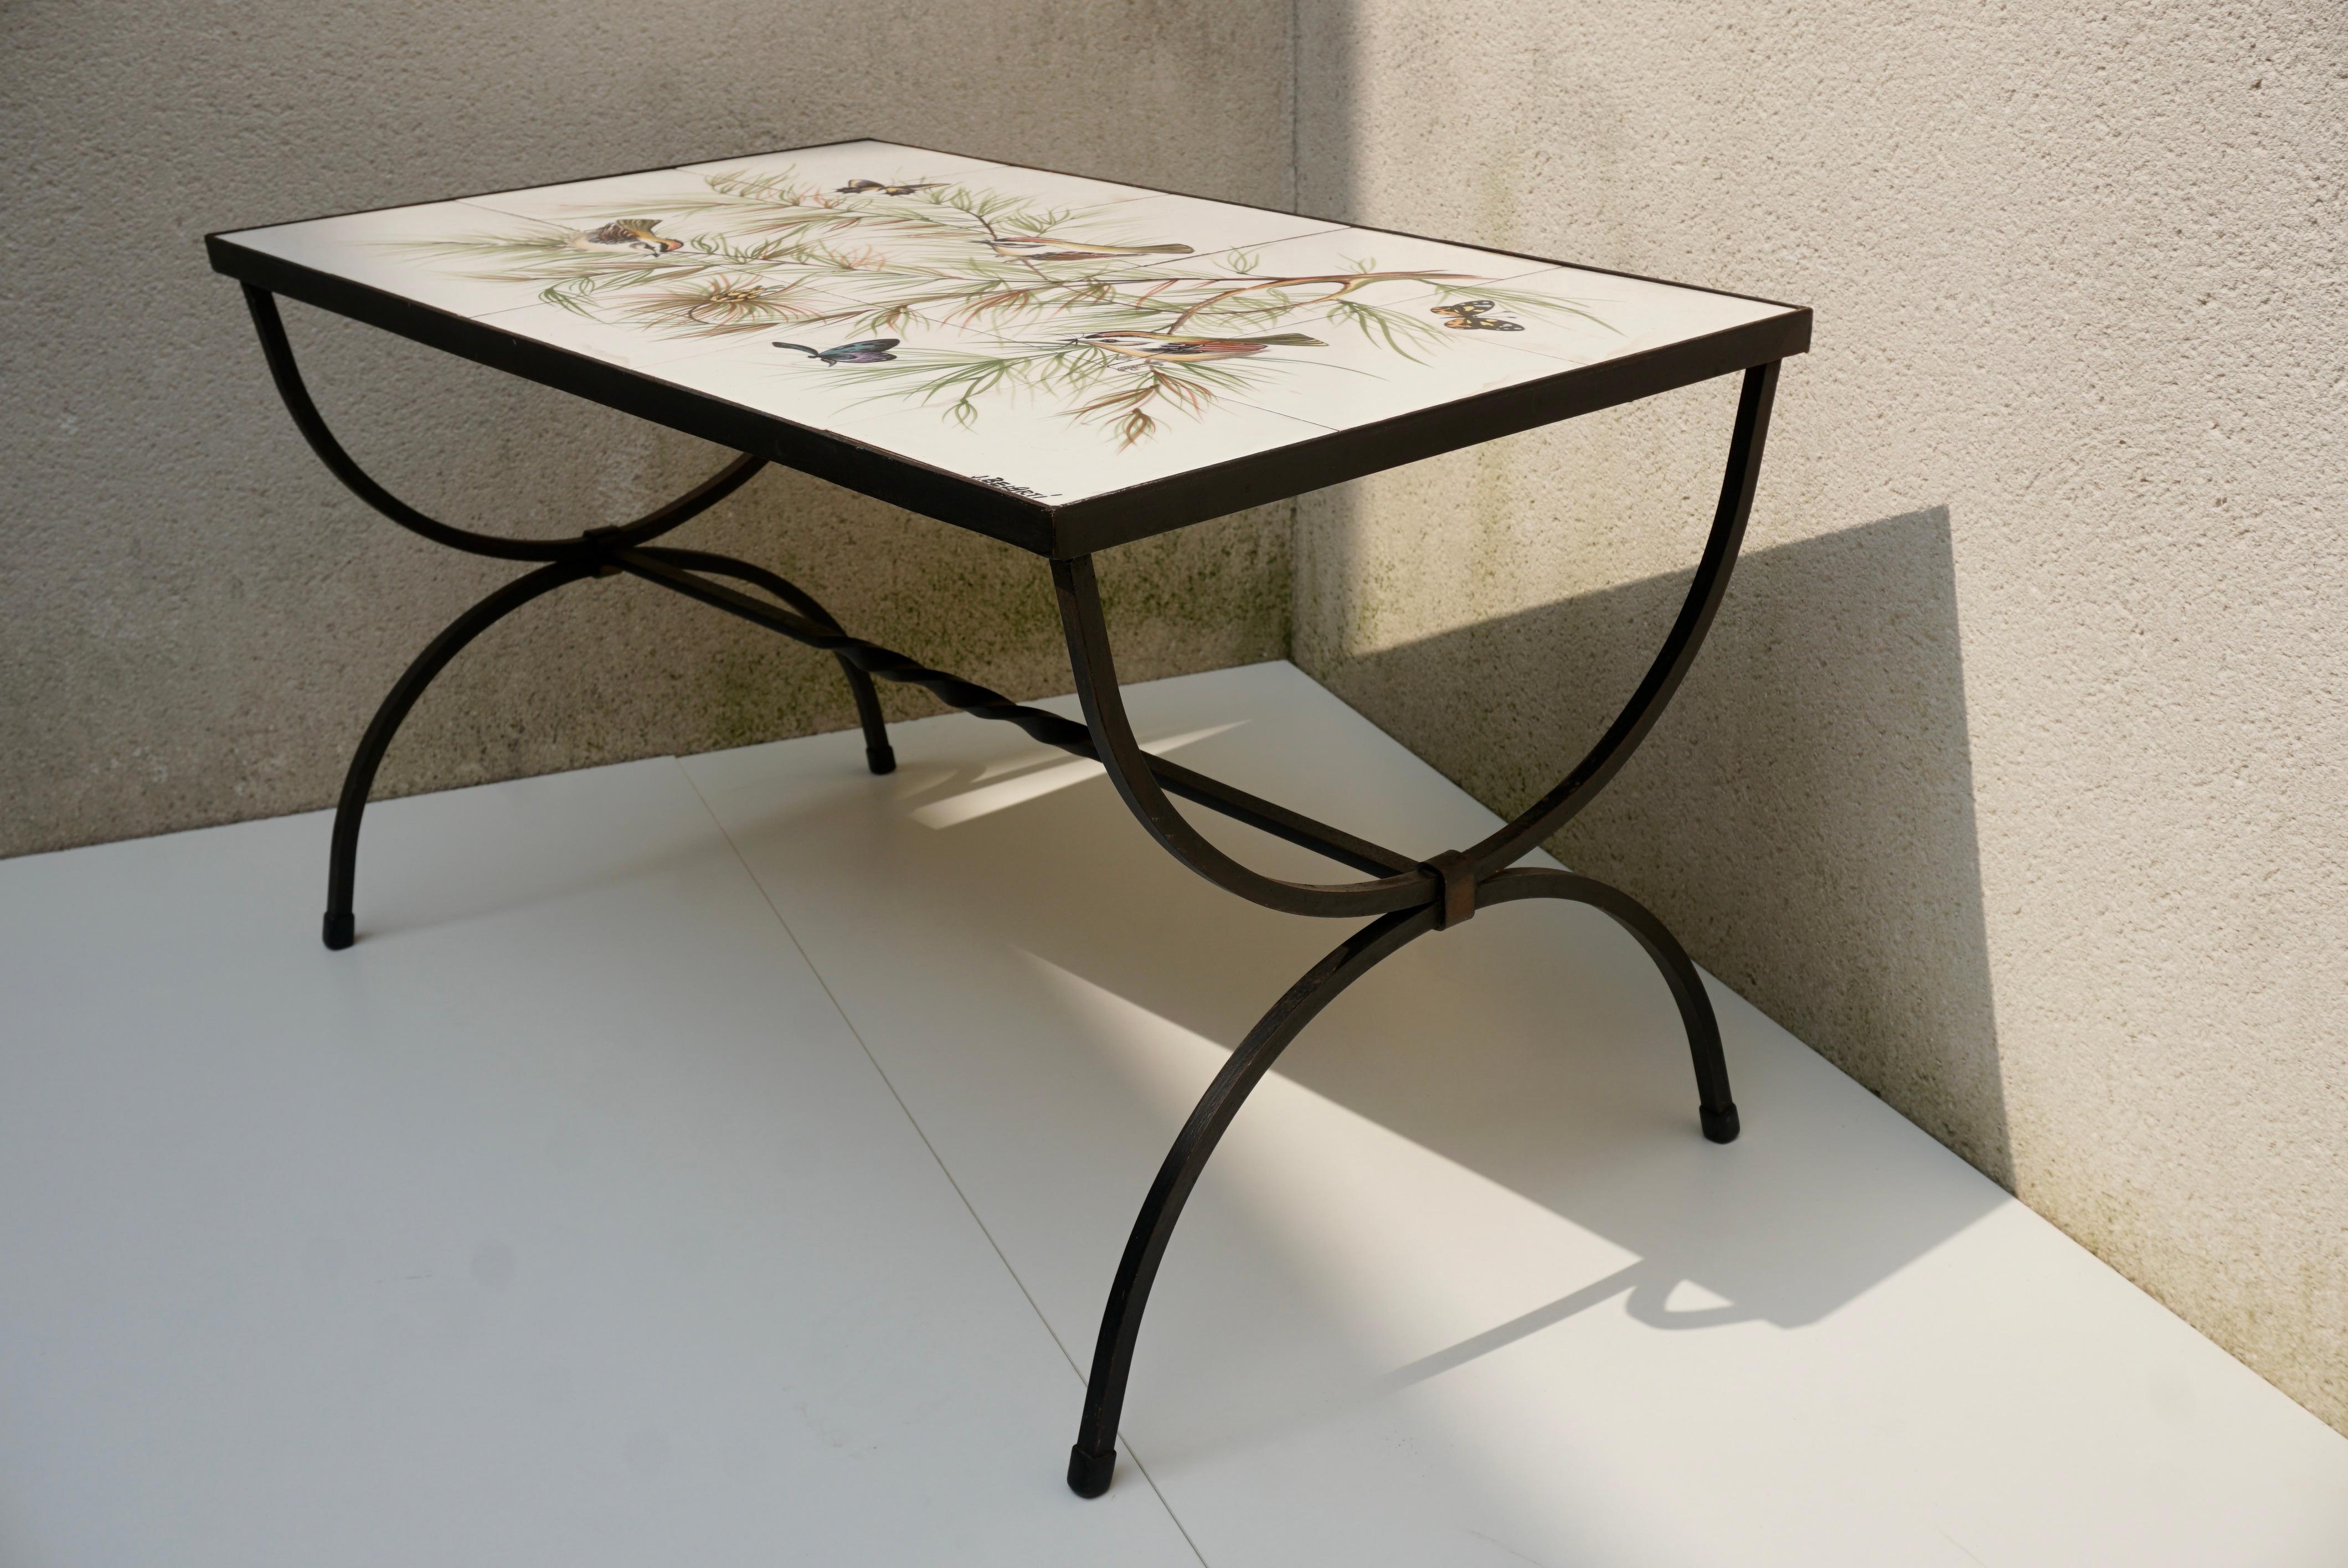 Hollywood Regency Belarti Ceramic Tile Side Coffee Table with Birds and Butterflies, 1960s For Sale